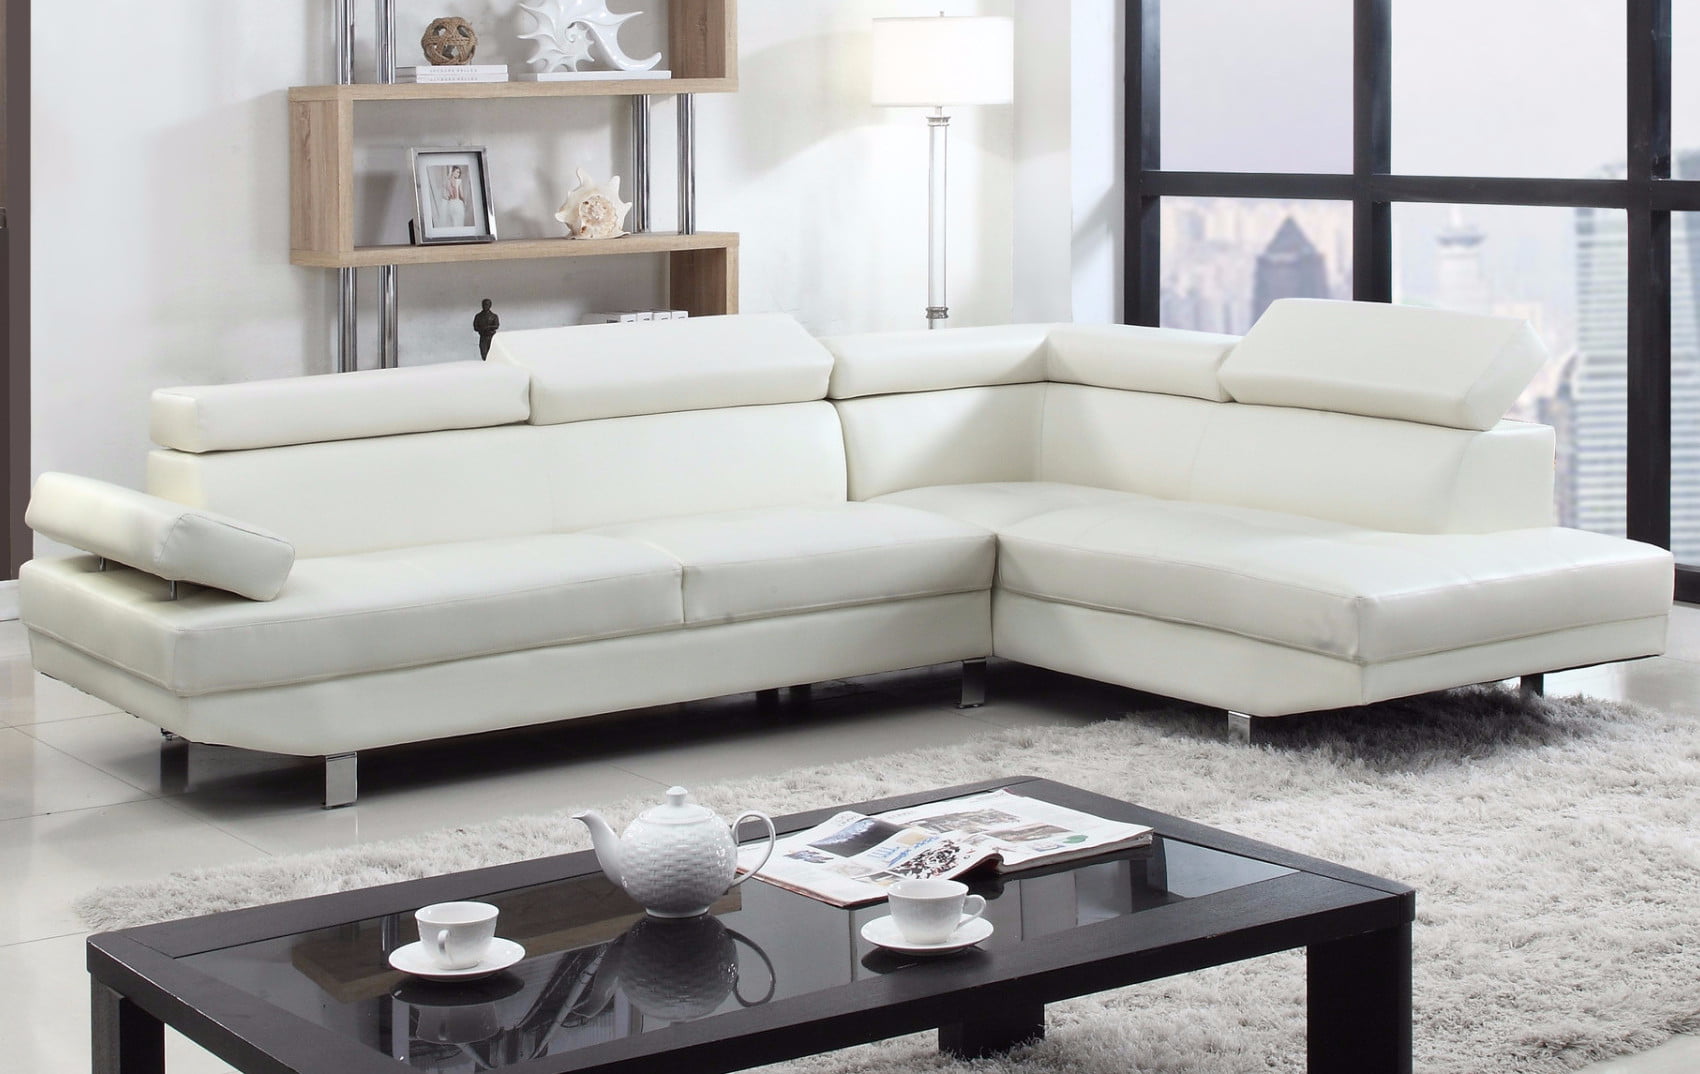 Modern Contemporary Design 2 Tone Microfiber Bonded Leather Sectional Sofa White 